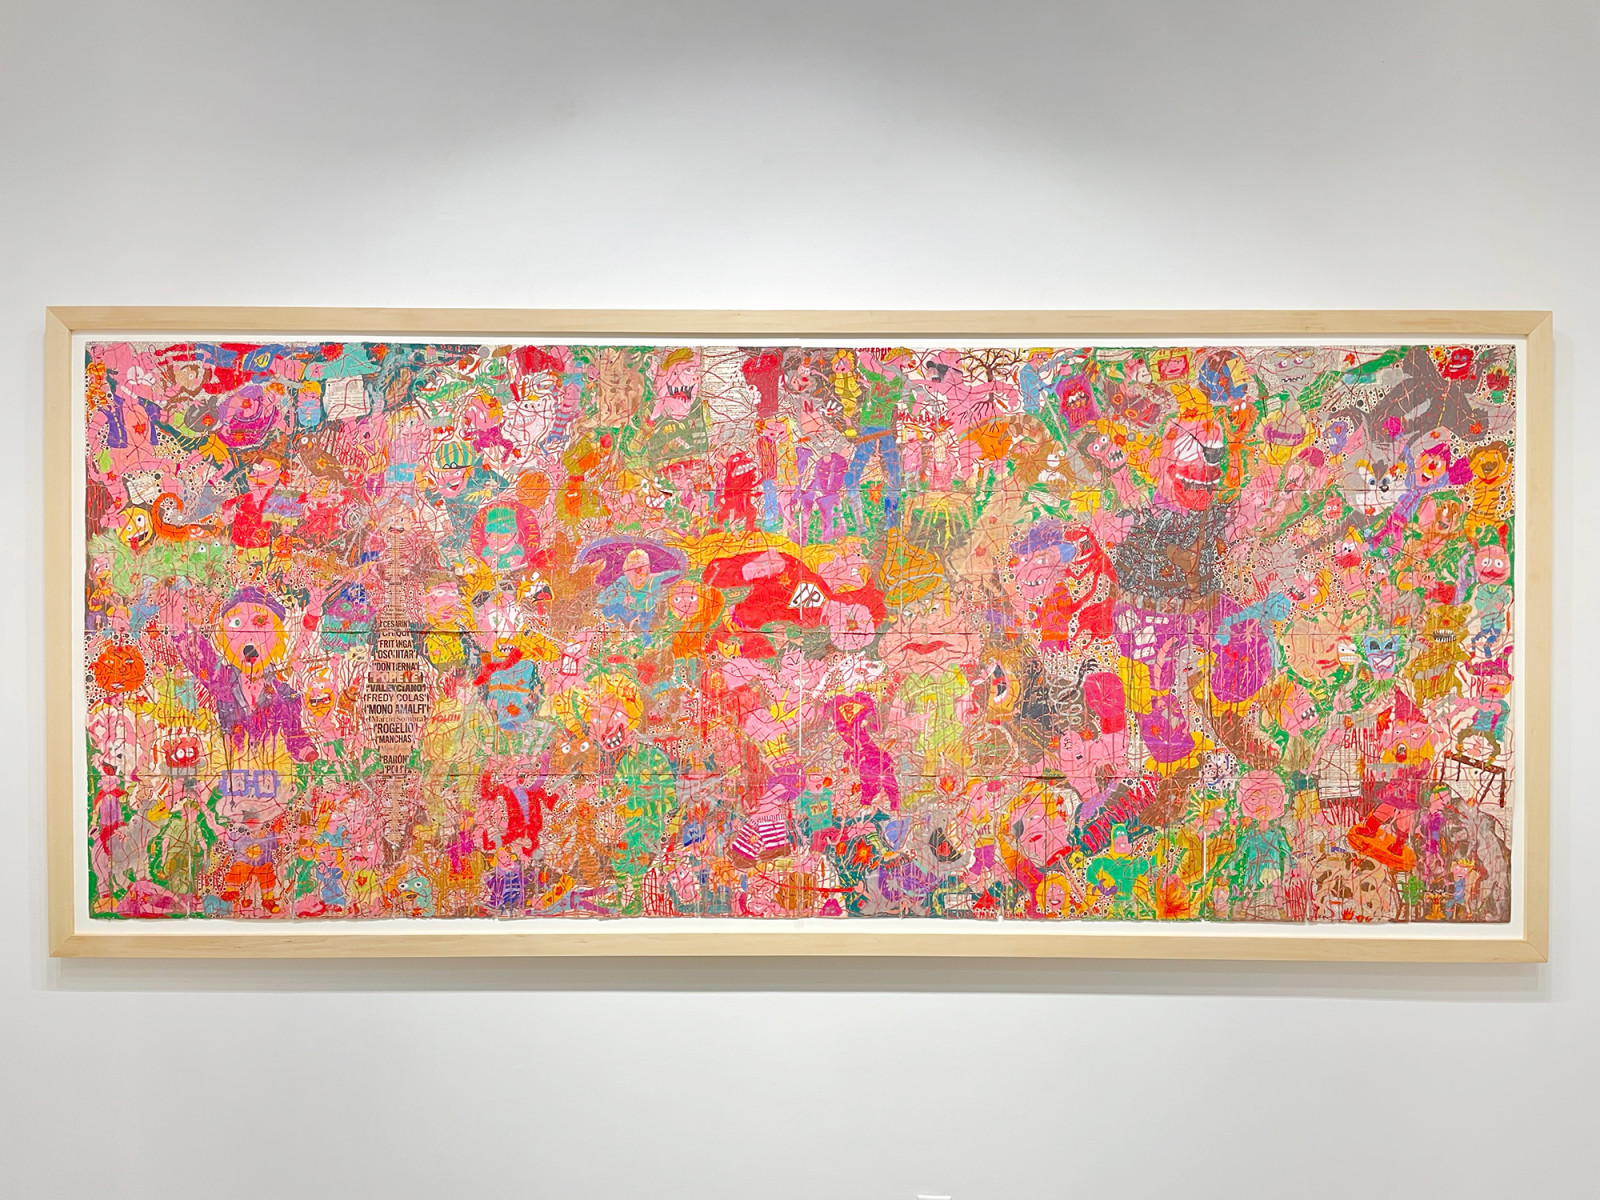 Camilo Restrepo. <em>A Land Reform 17</em>, 2019. Ink, water-soluble wax pastel, tape, stickers, newspaper clippings, glue and saliva on paper, 46 3/4 x 115 3/4 inches (118.7 x 294 cm) Framed